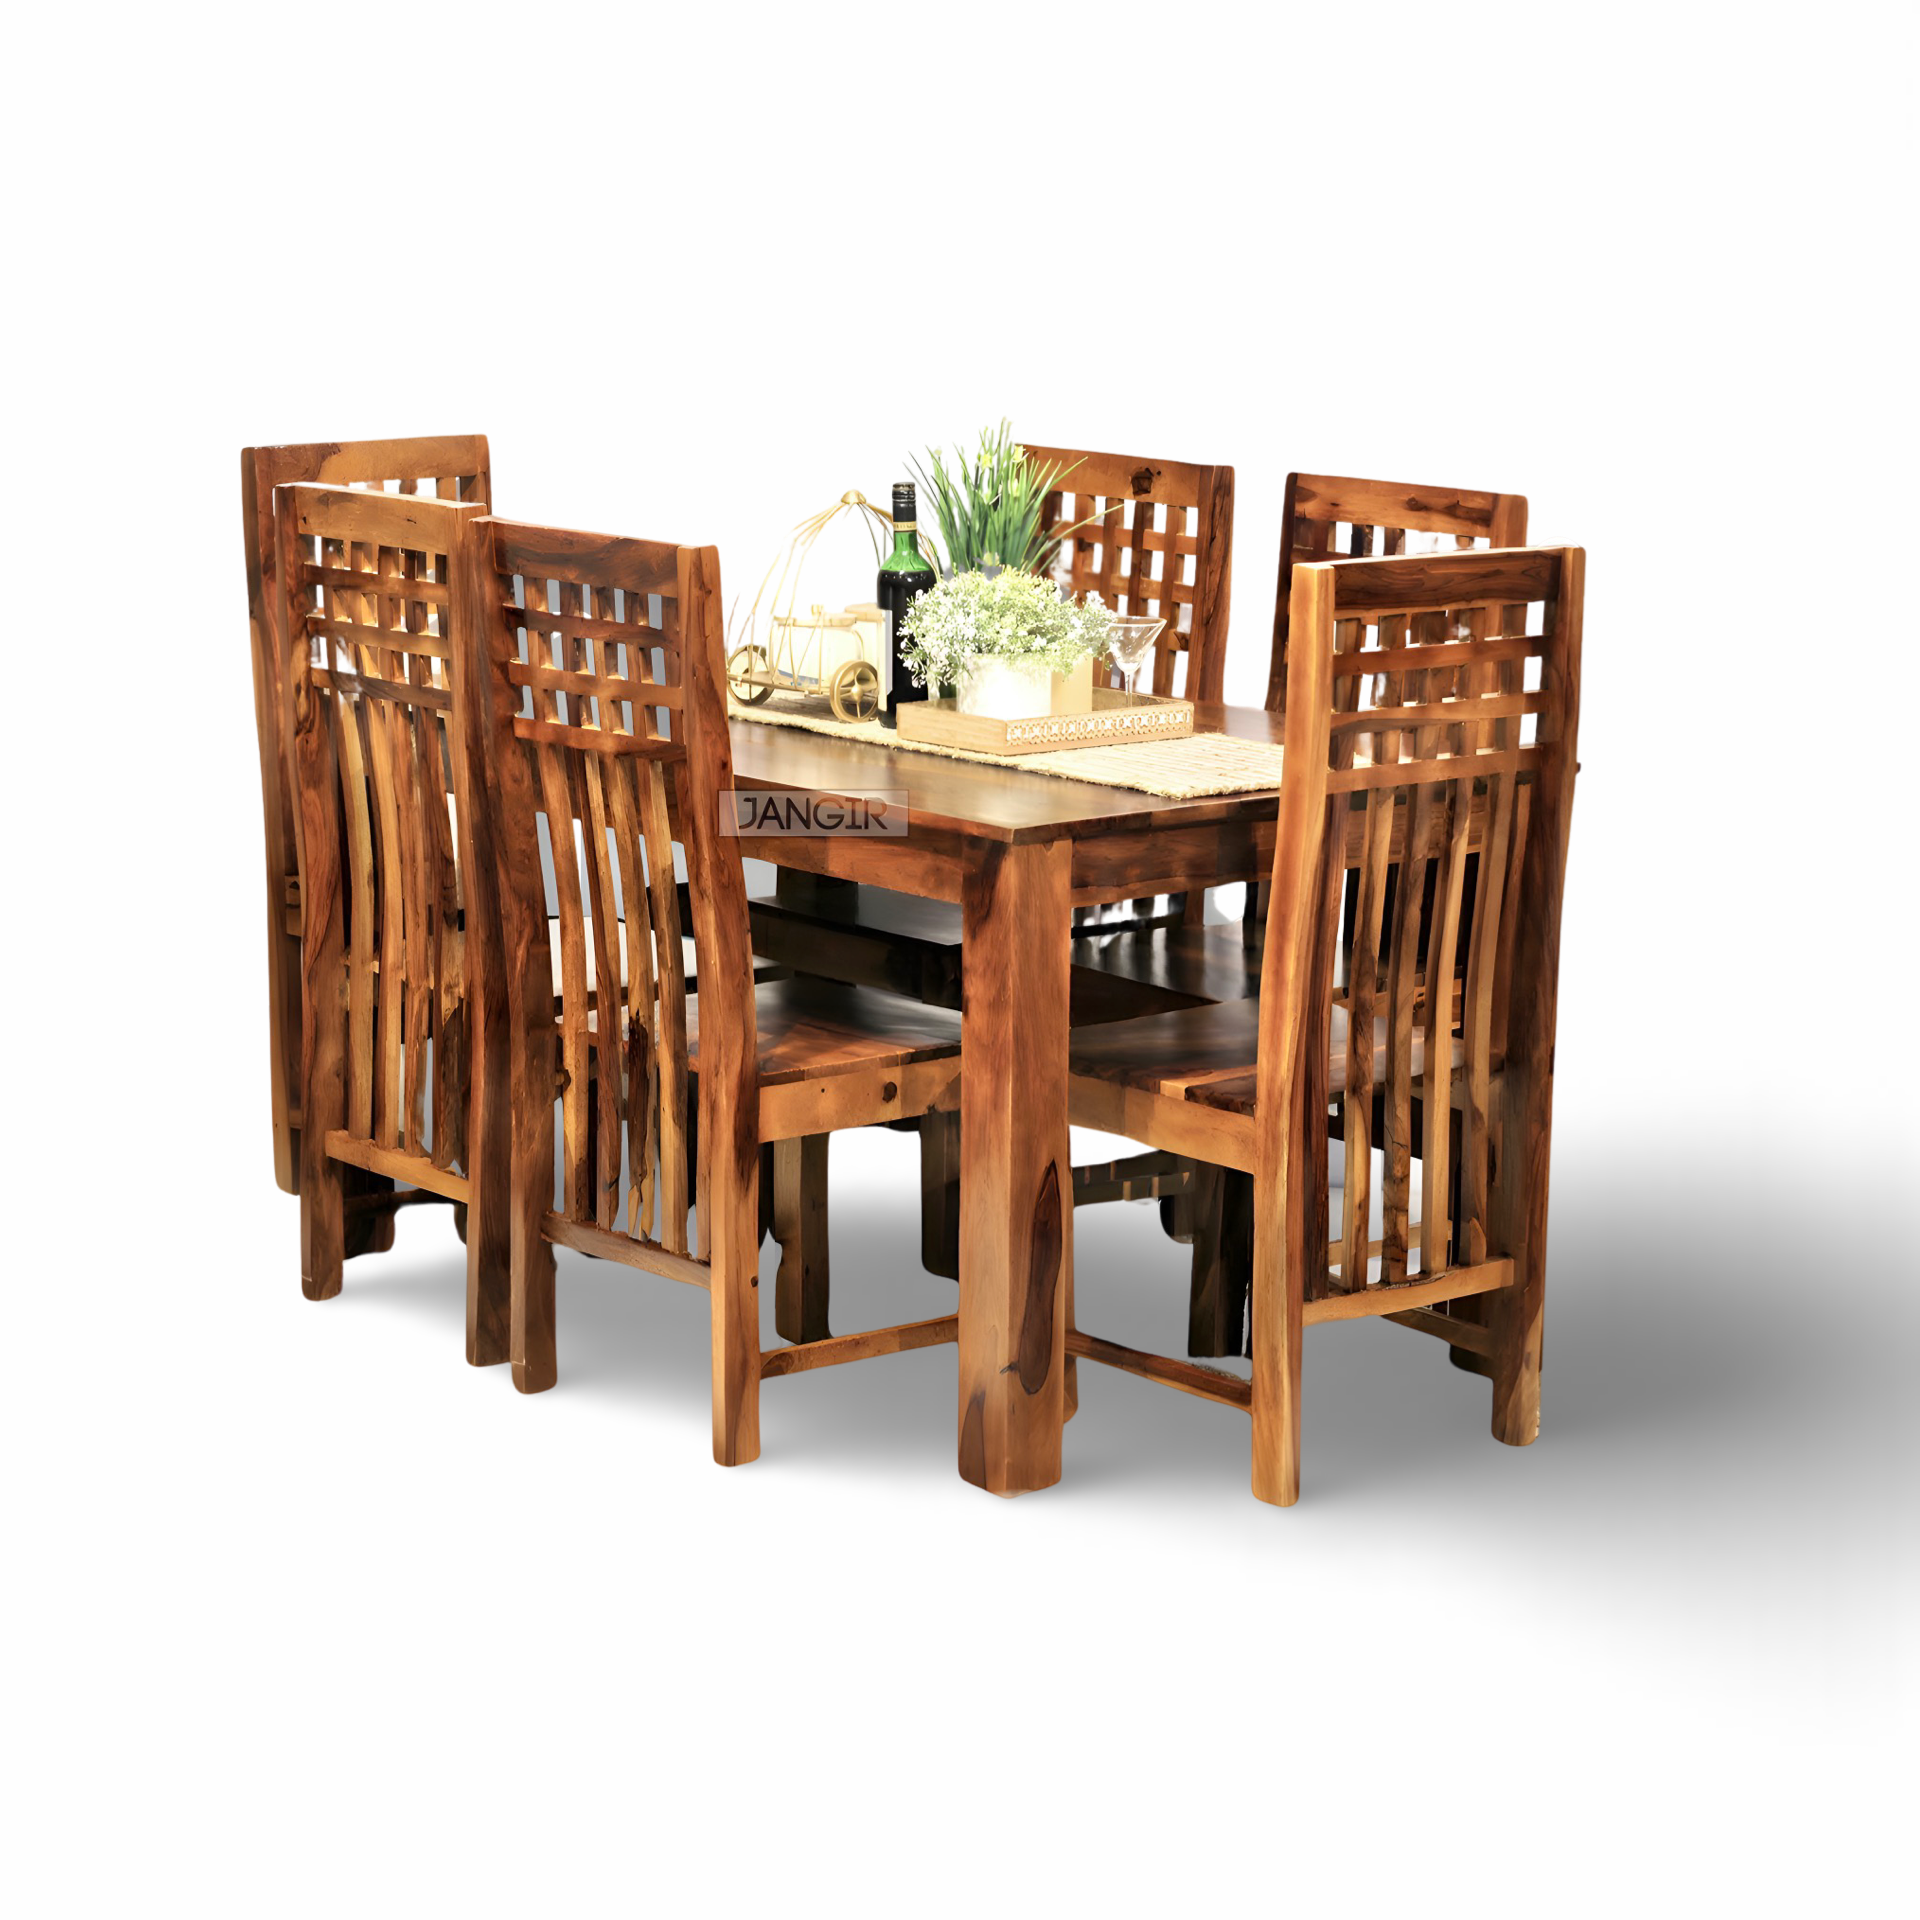 Elevate your dining experience with our Avan Solid Wood Dining Set Six Seater, made with sheesham wood. Shop our Budget friendly and durable six and four-seater dining table now!